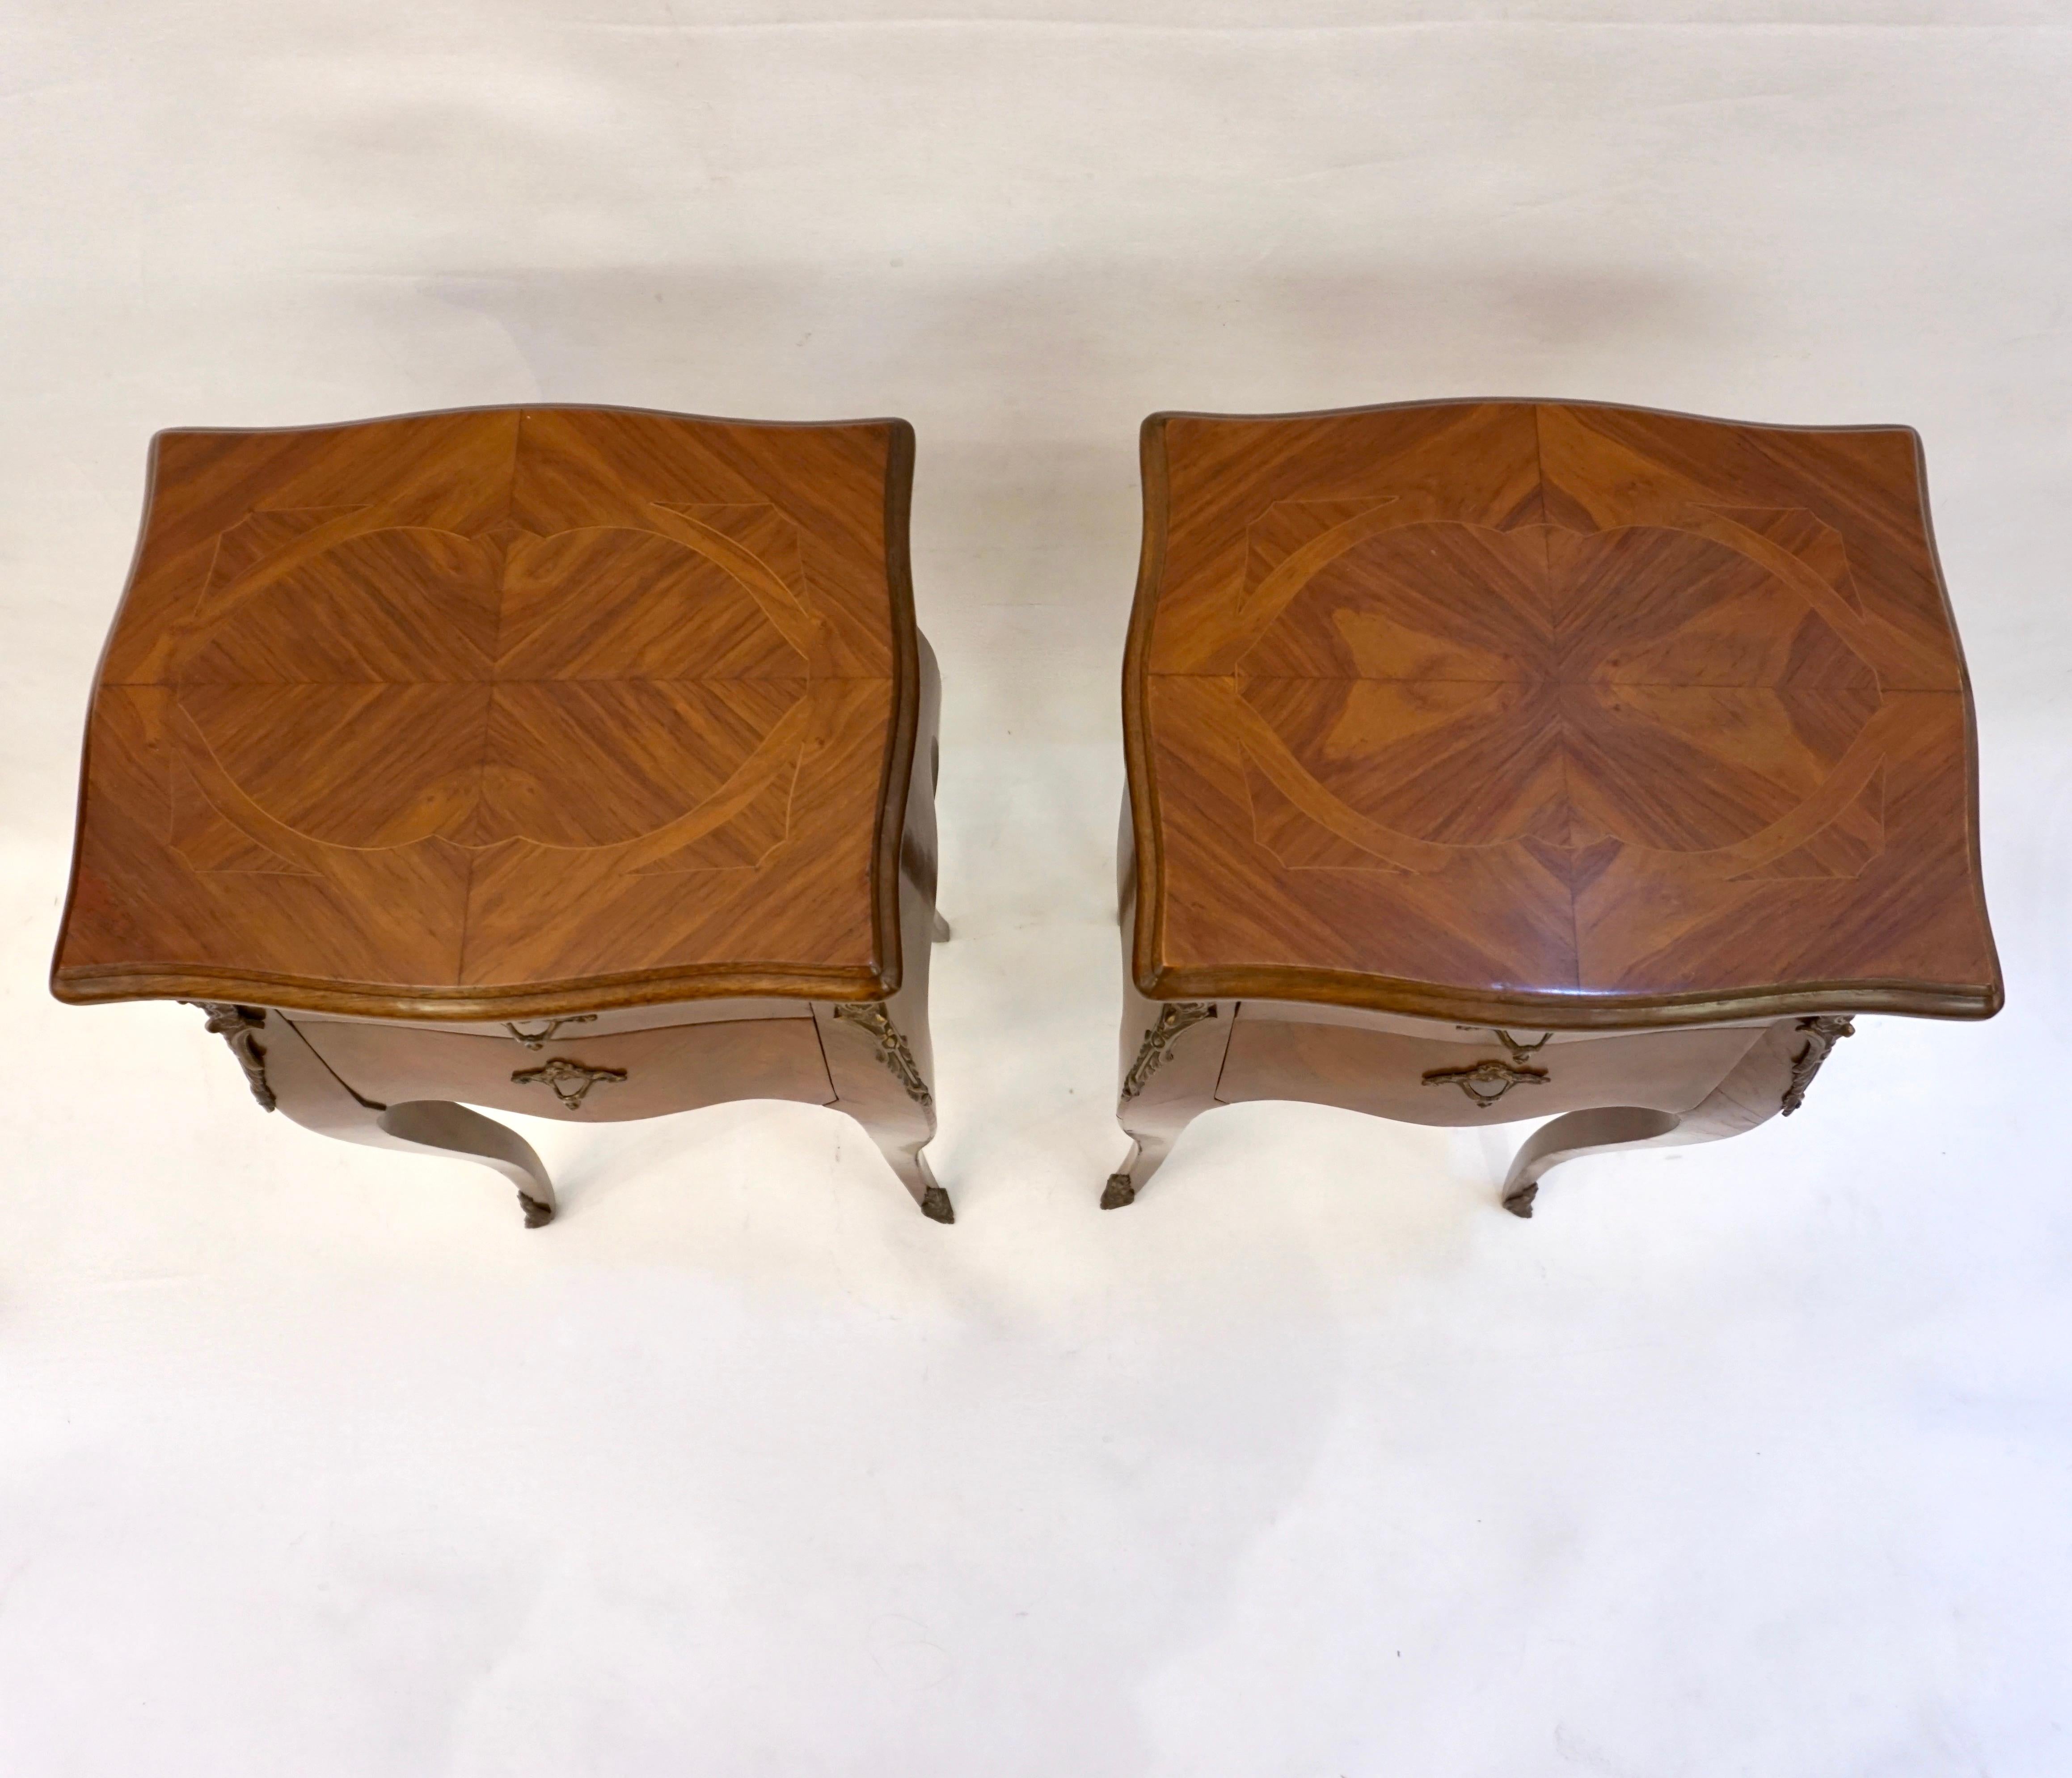 Cast 1940 French Louis XV Revival Pair of Inlaid Rosewood Walnut 2-Drawer Side Tables